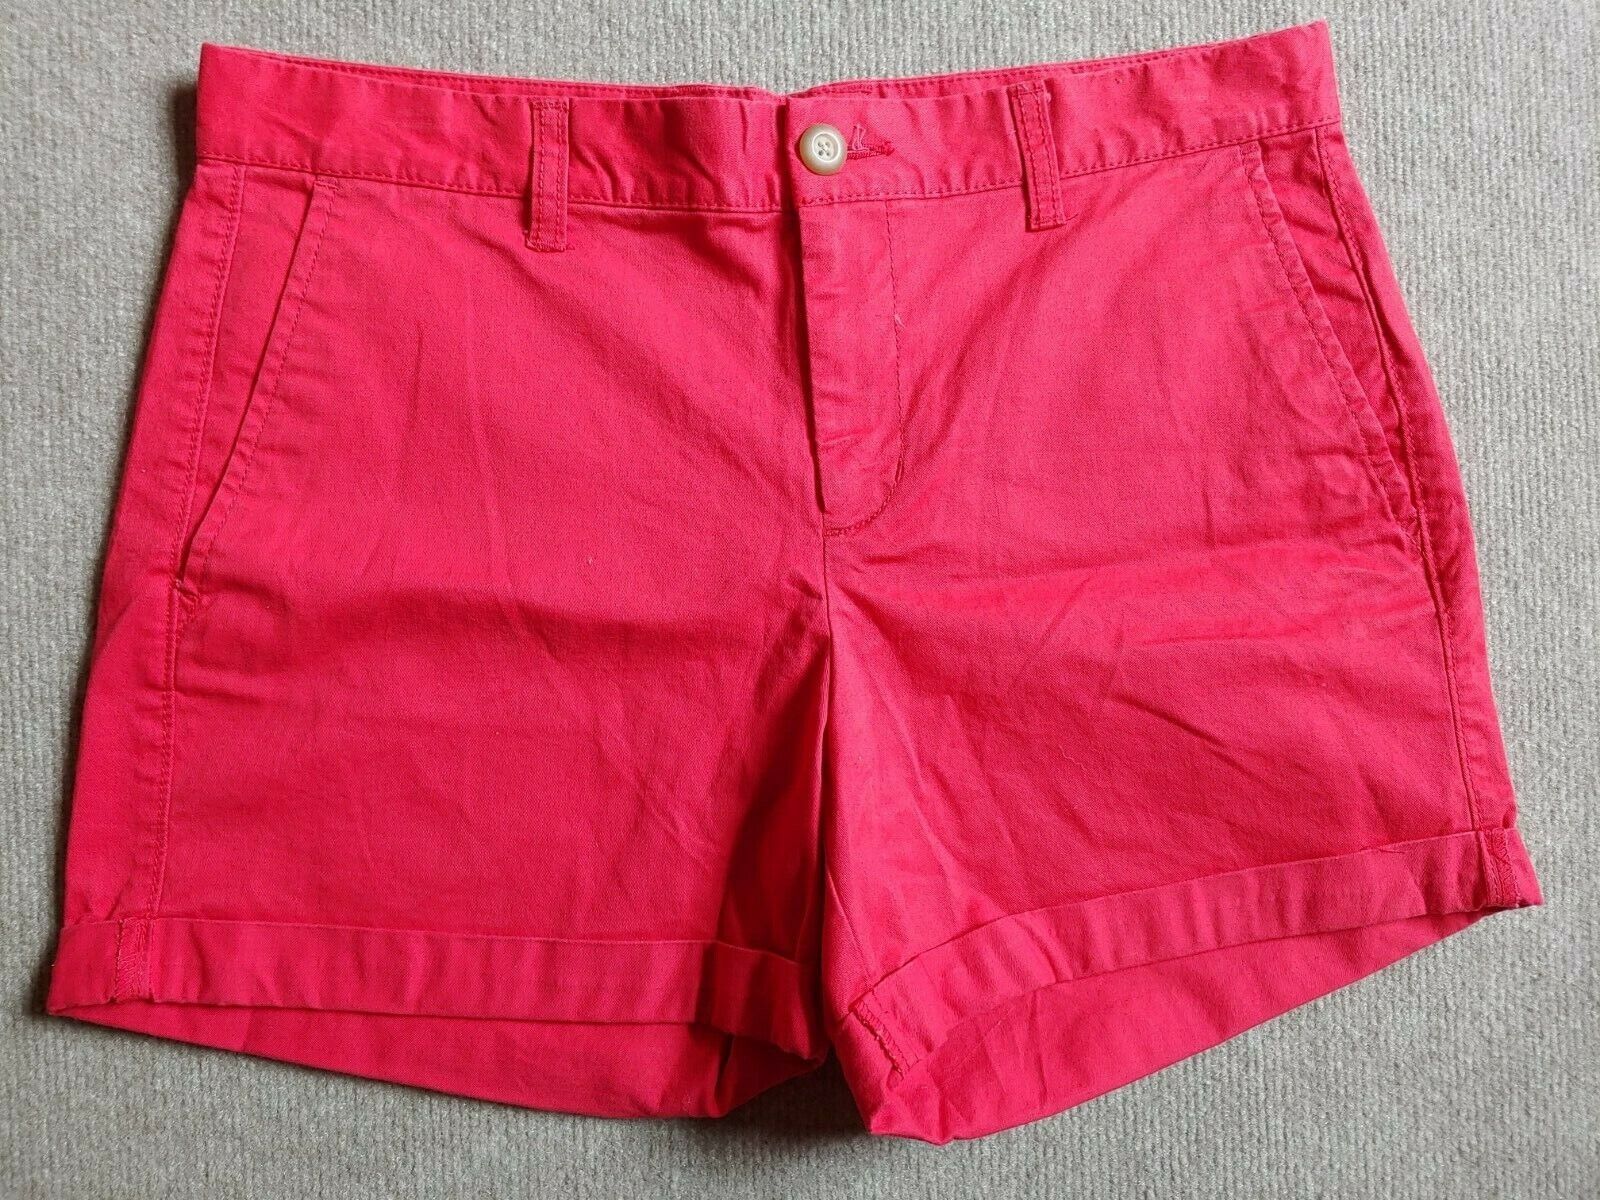 Primary image for Khakis by Gap Girlfriend 4 in Shorts Womens Size 6 Red Cuffed Cotton Stretch